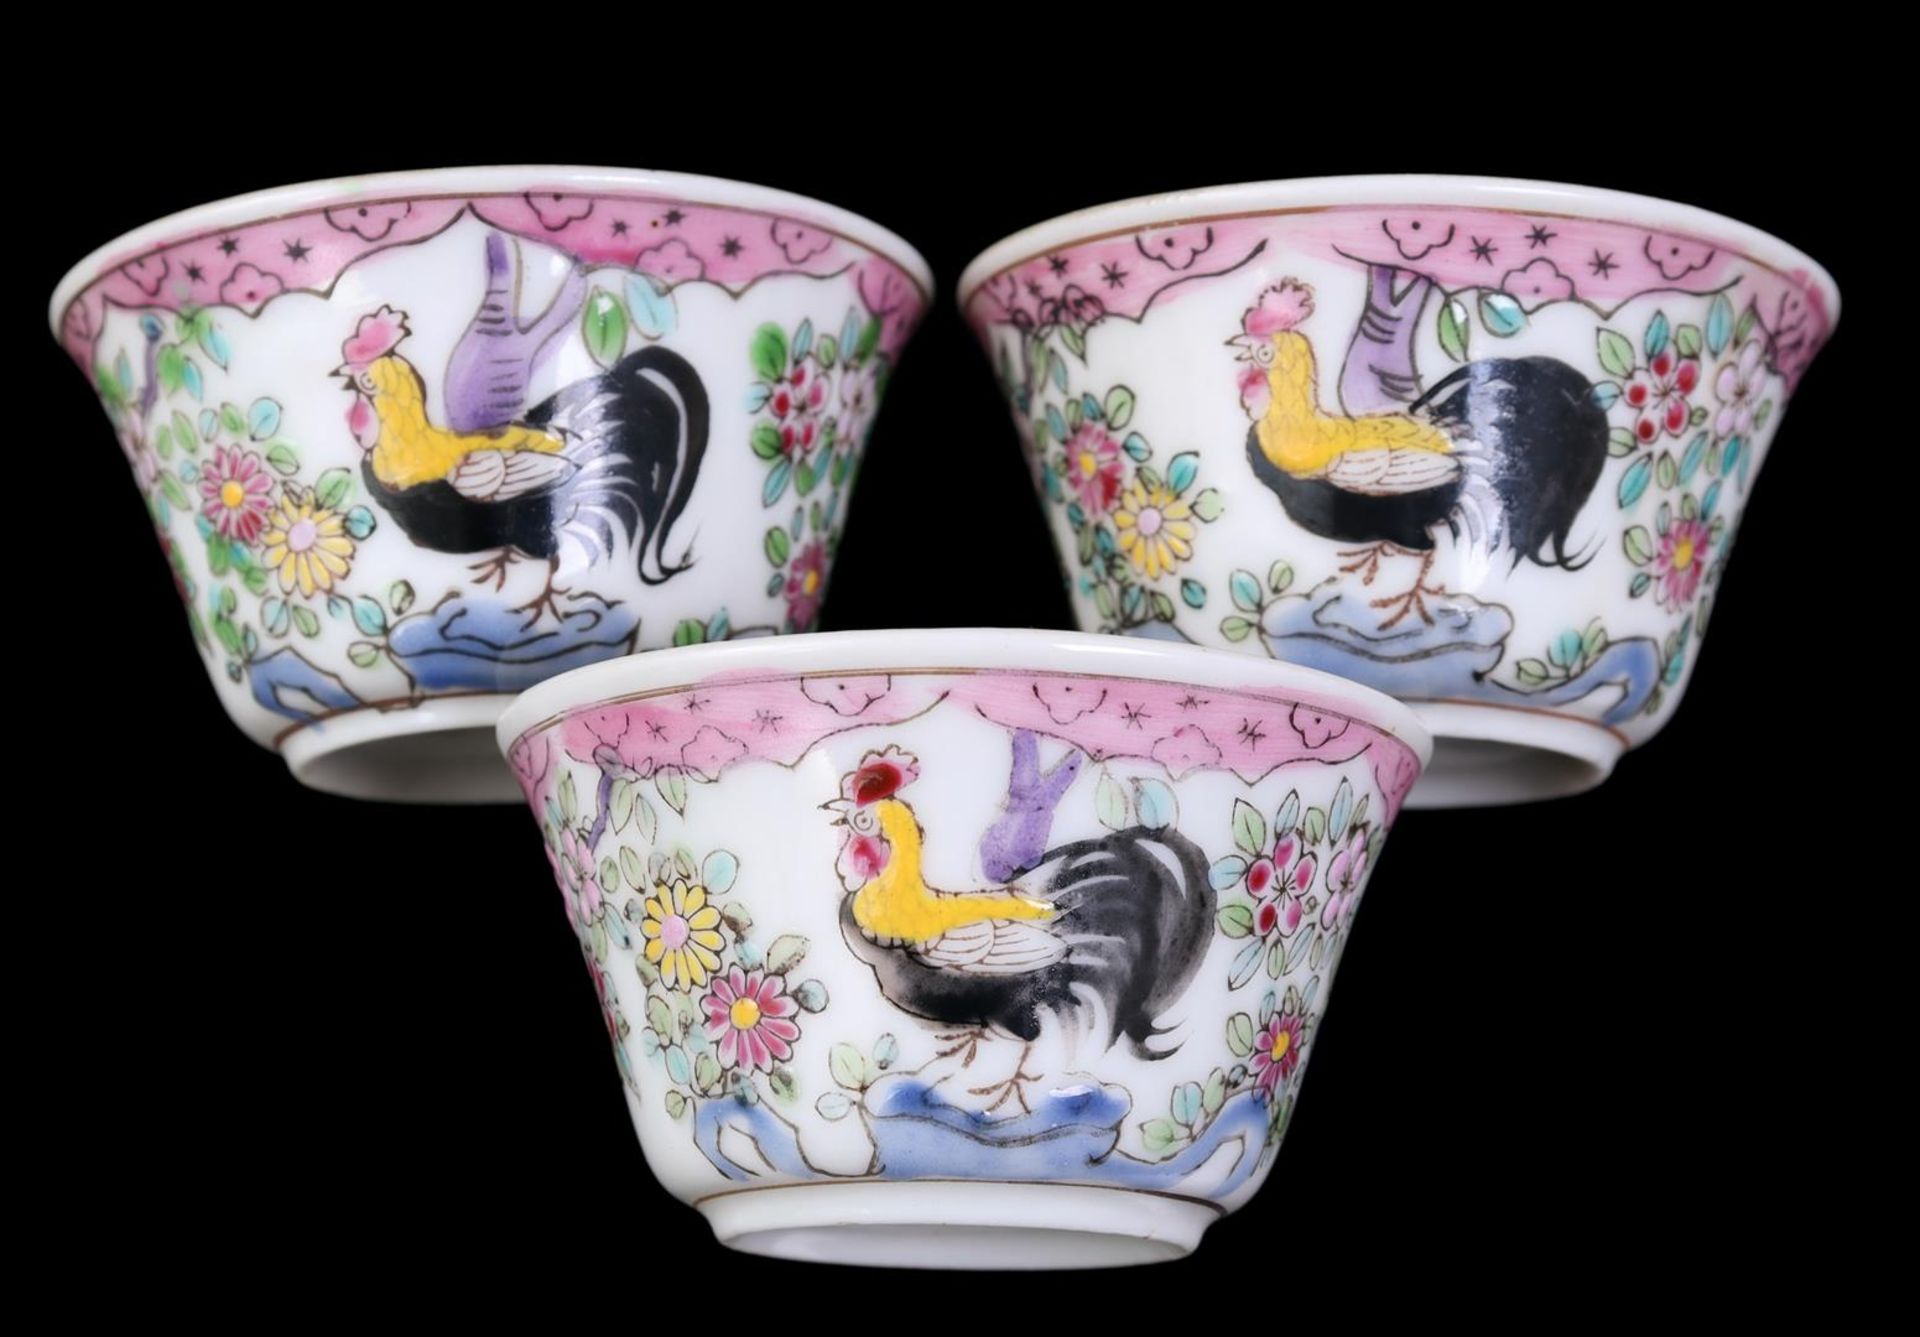 3 porcelain bowls on saucer, decor roosters in landscape, China ca.1775, bowl 3.5 cm high, 6.5 cm di - Image 3 of 3